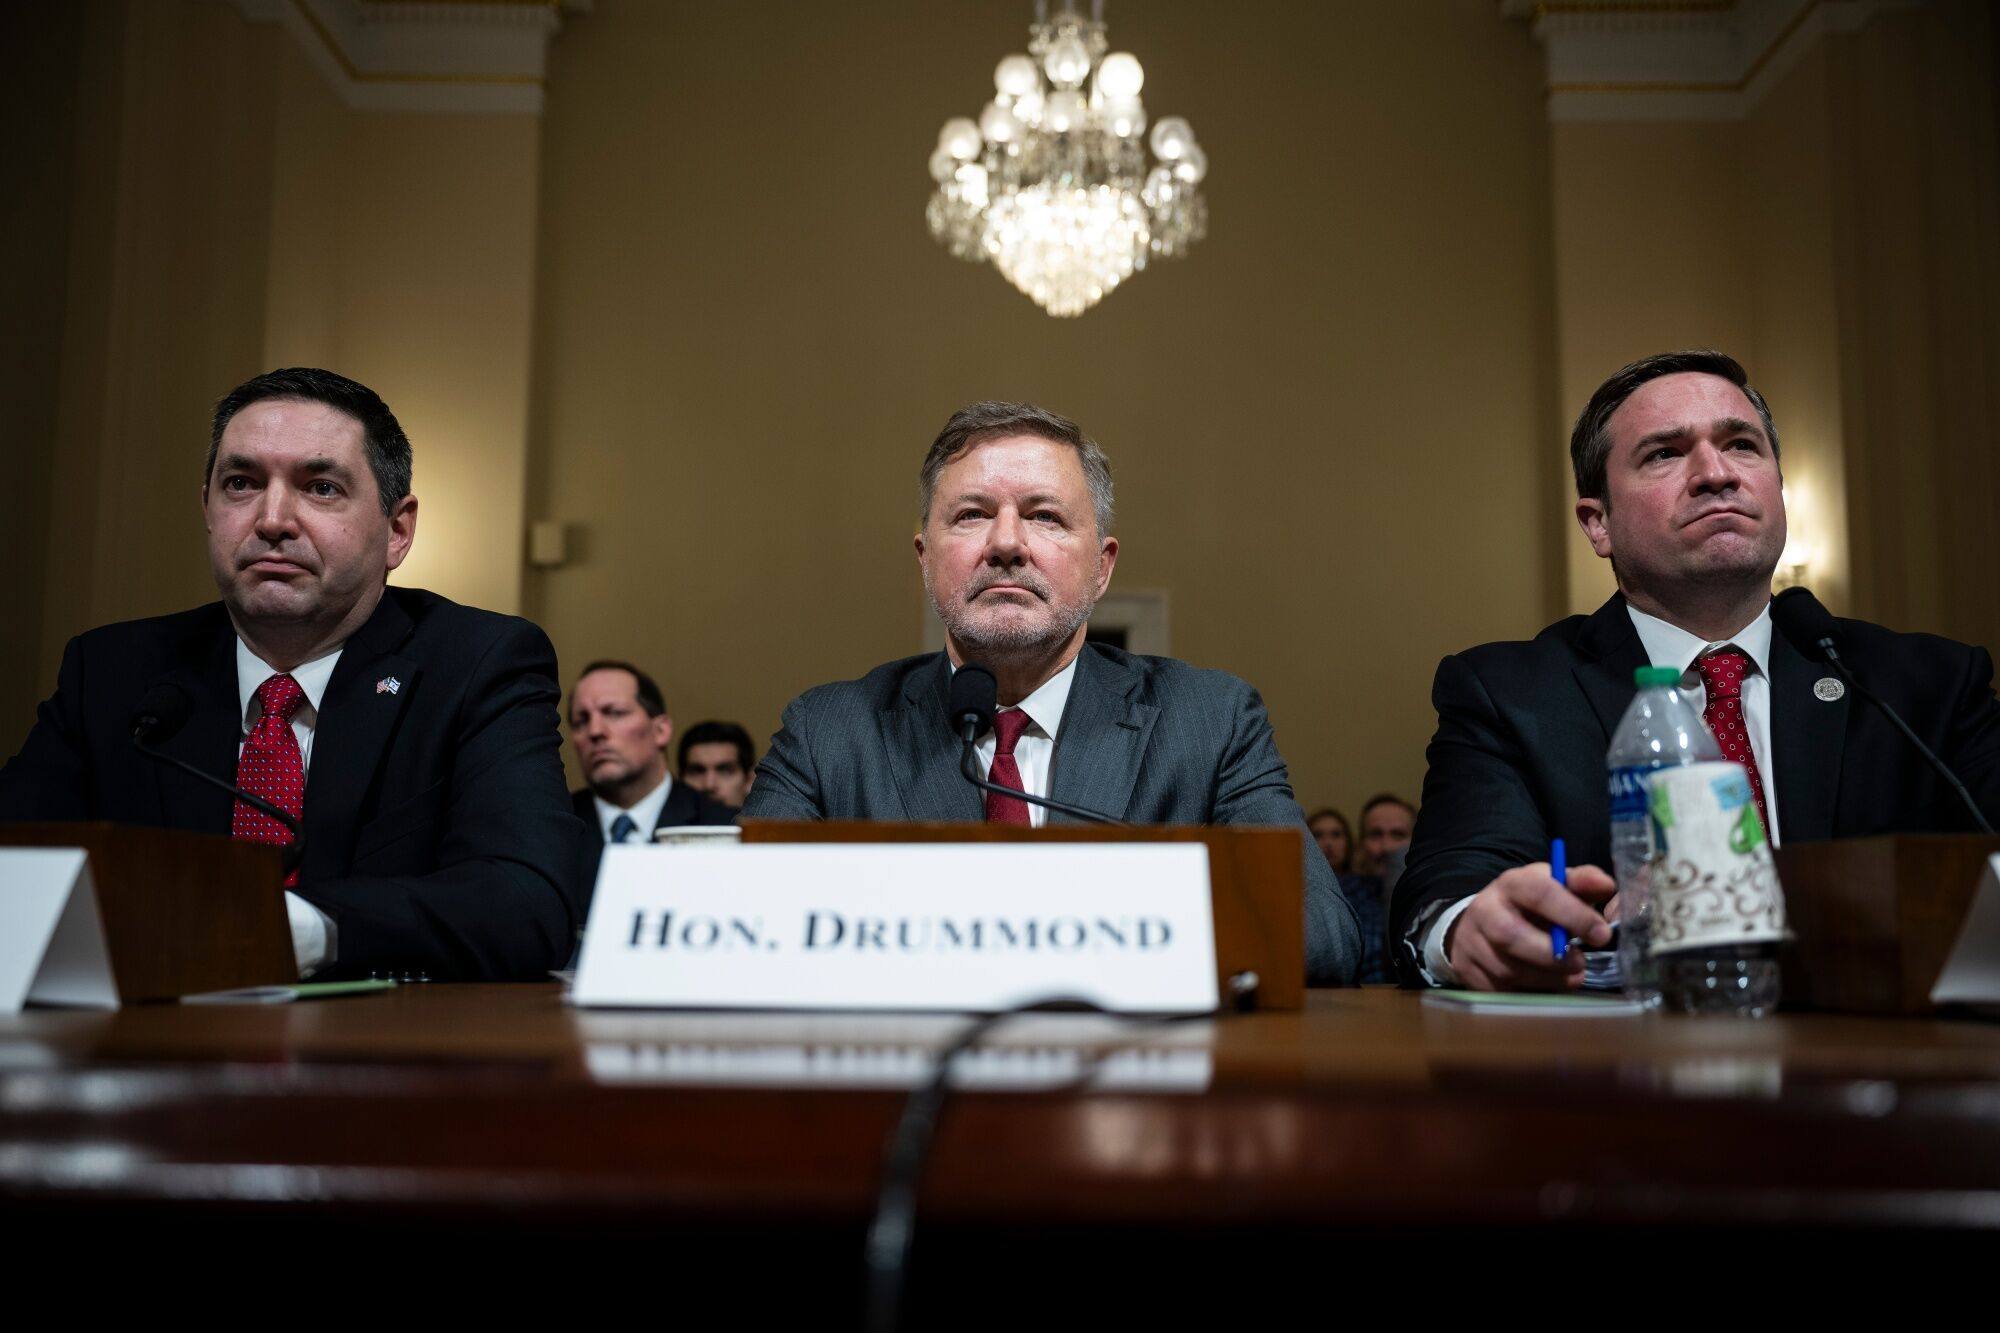 Gentner Drummond, Oklahoma’s attorney general, testifies at a US House Homeland Security Committee hearing on Wednesday. Photo: Bloomberg